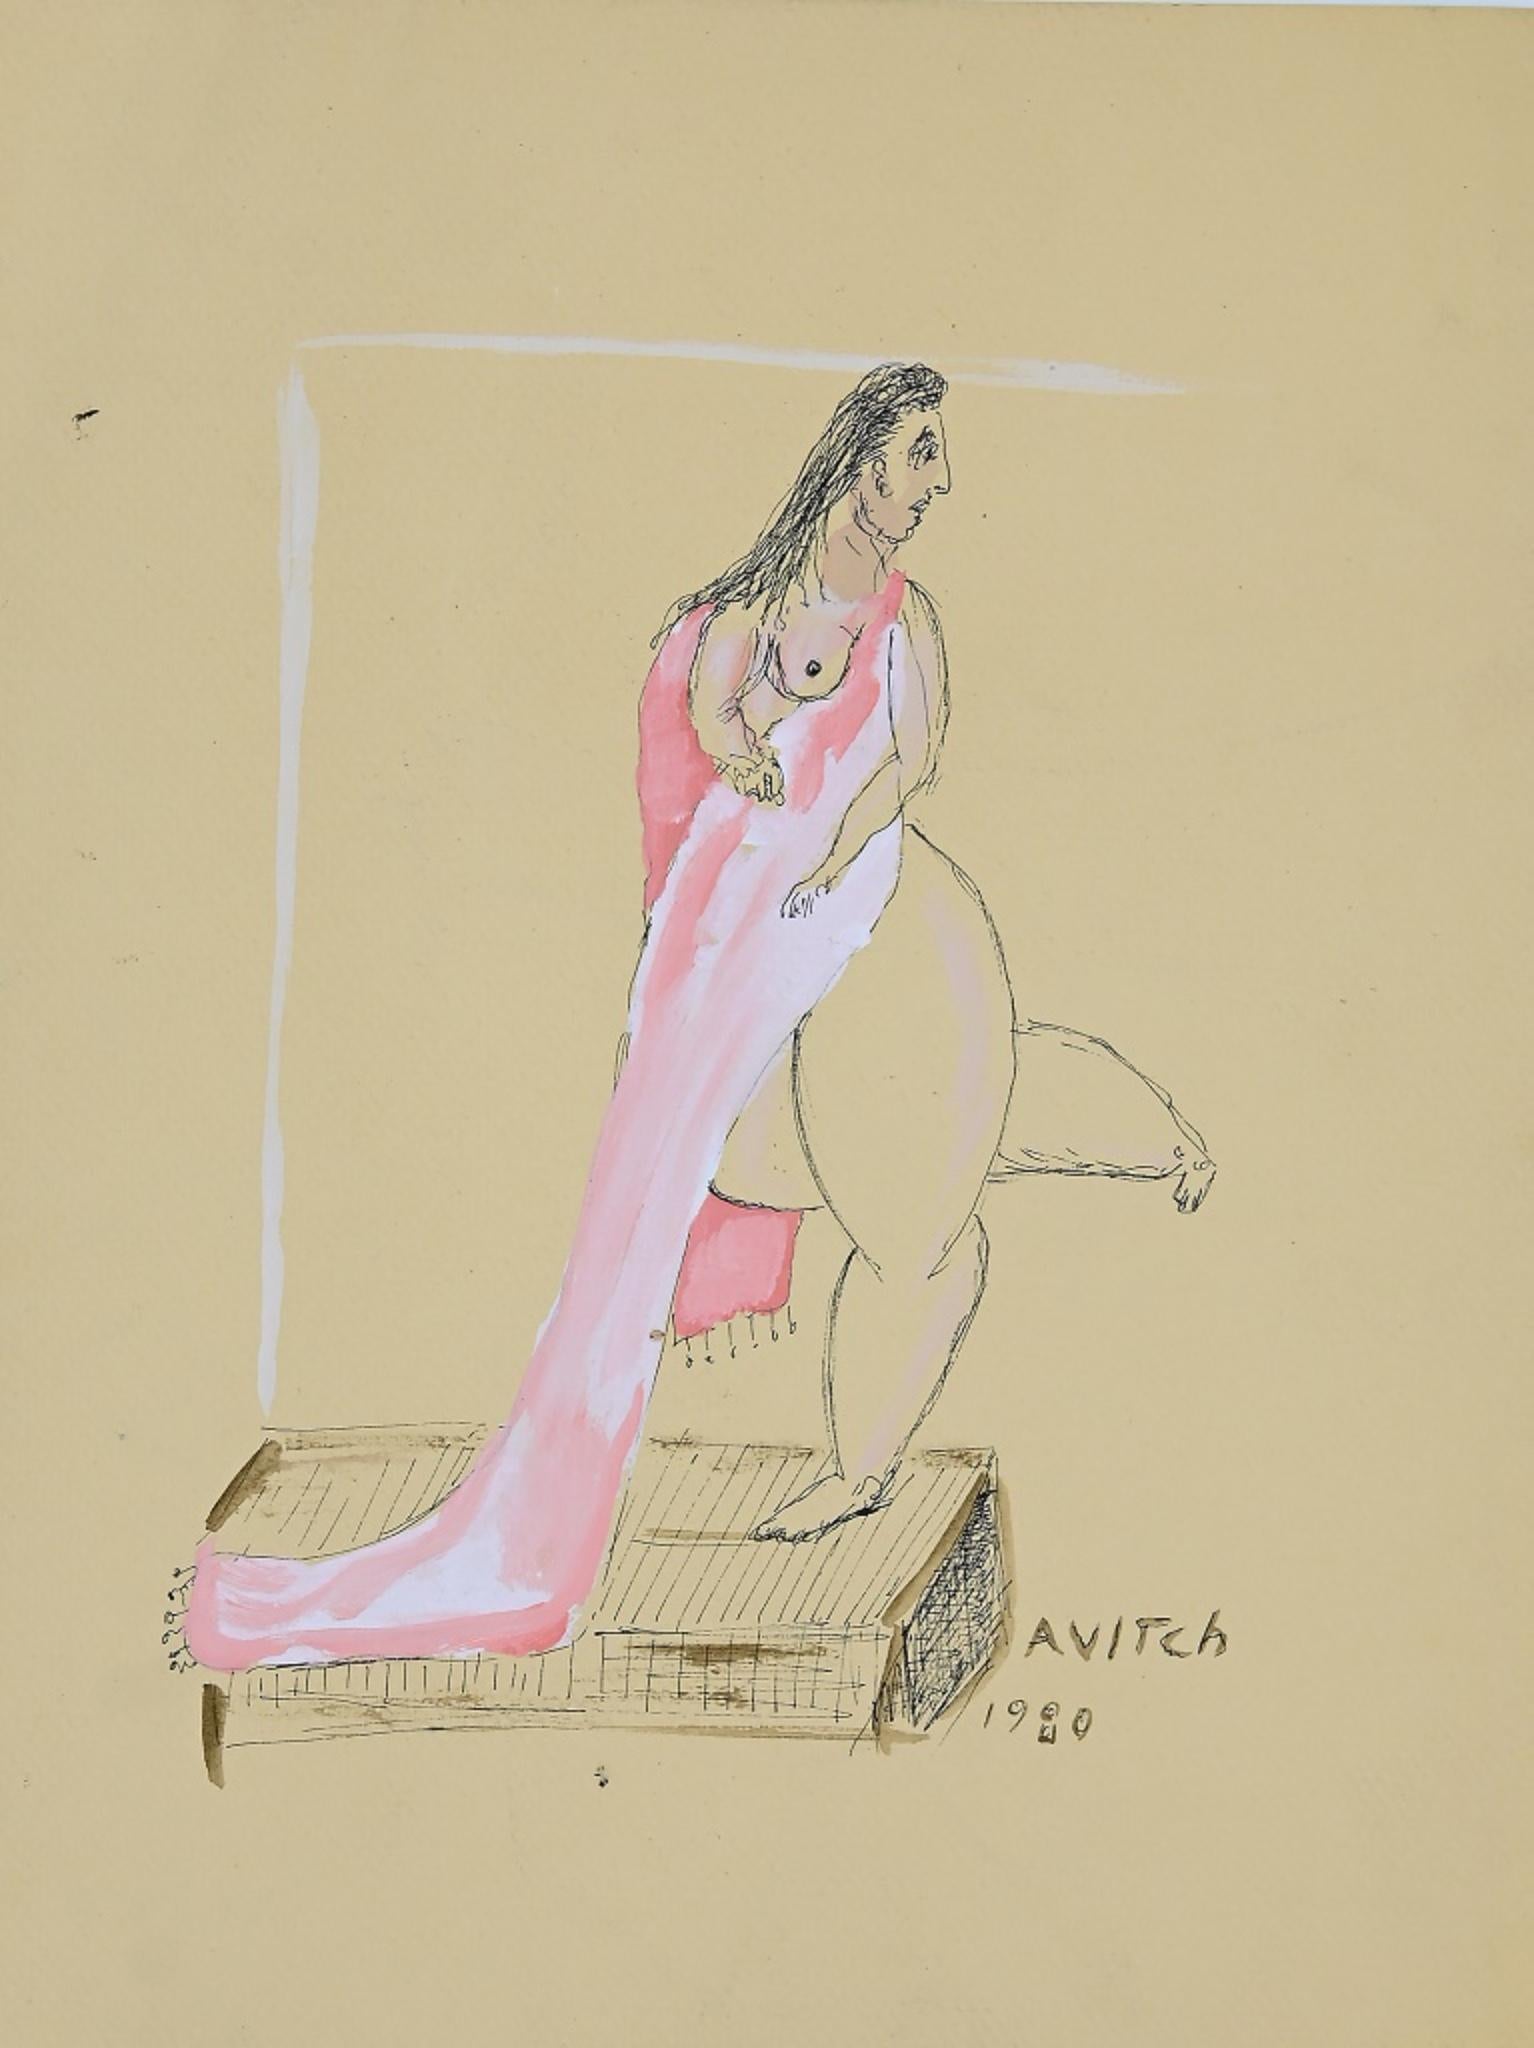 Unknown Nude - Figure of Woman - Original Tempera and China Ink signed "Avitch" - 1980s